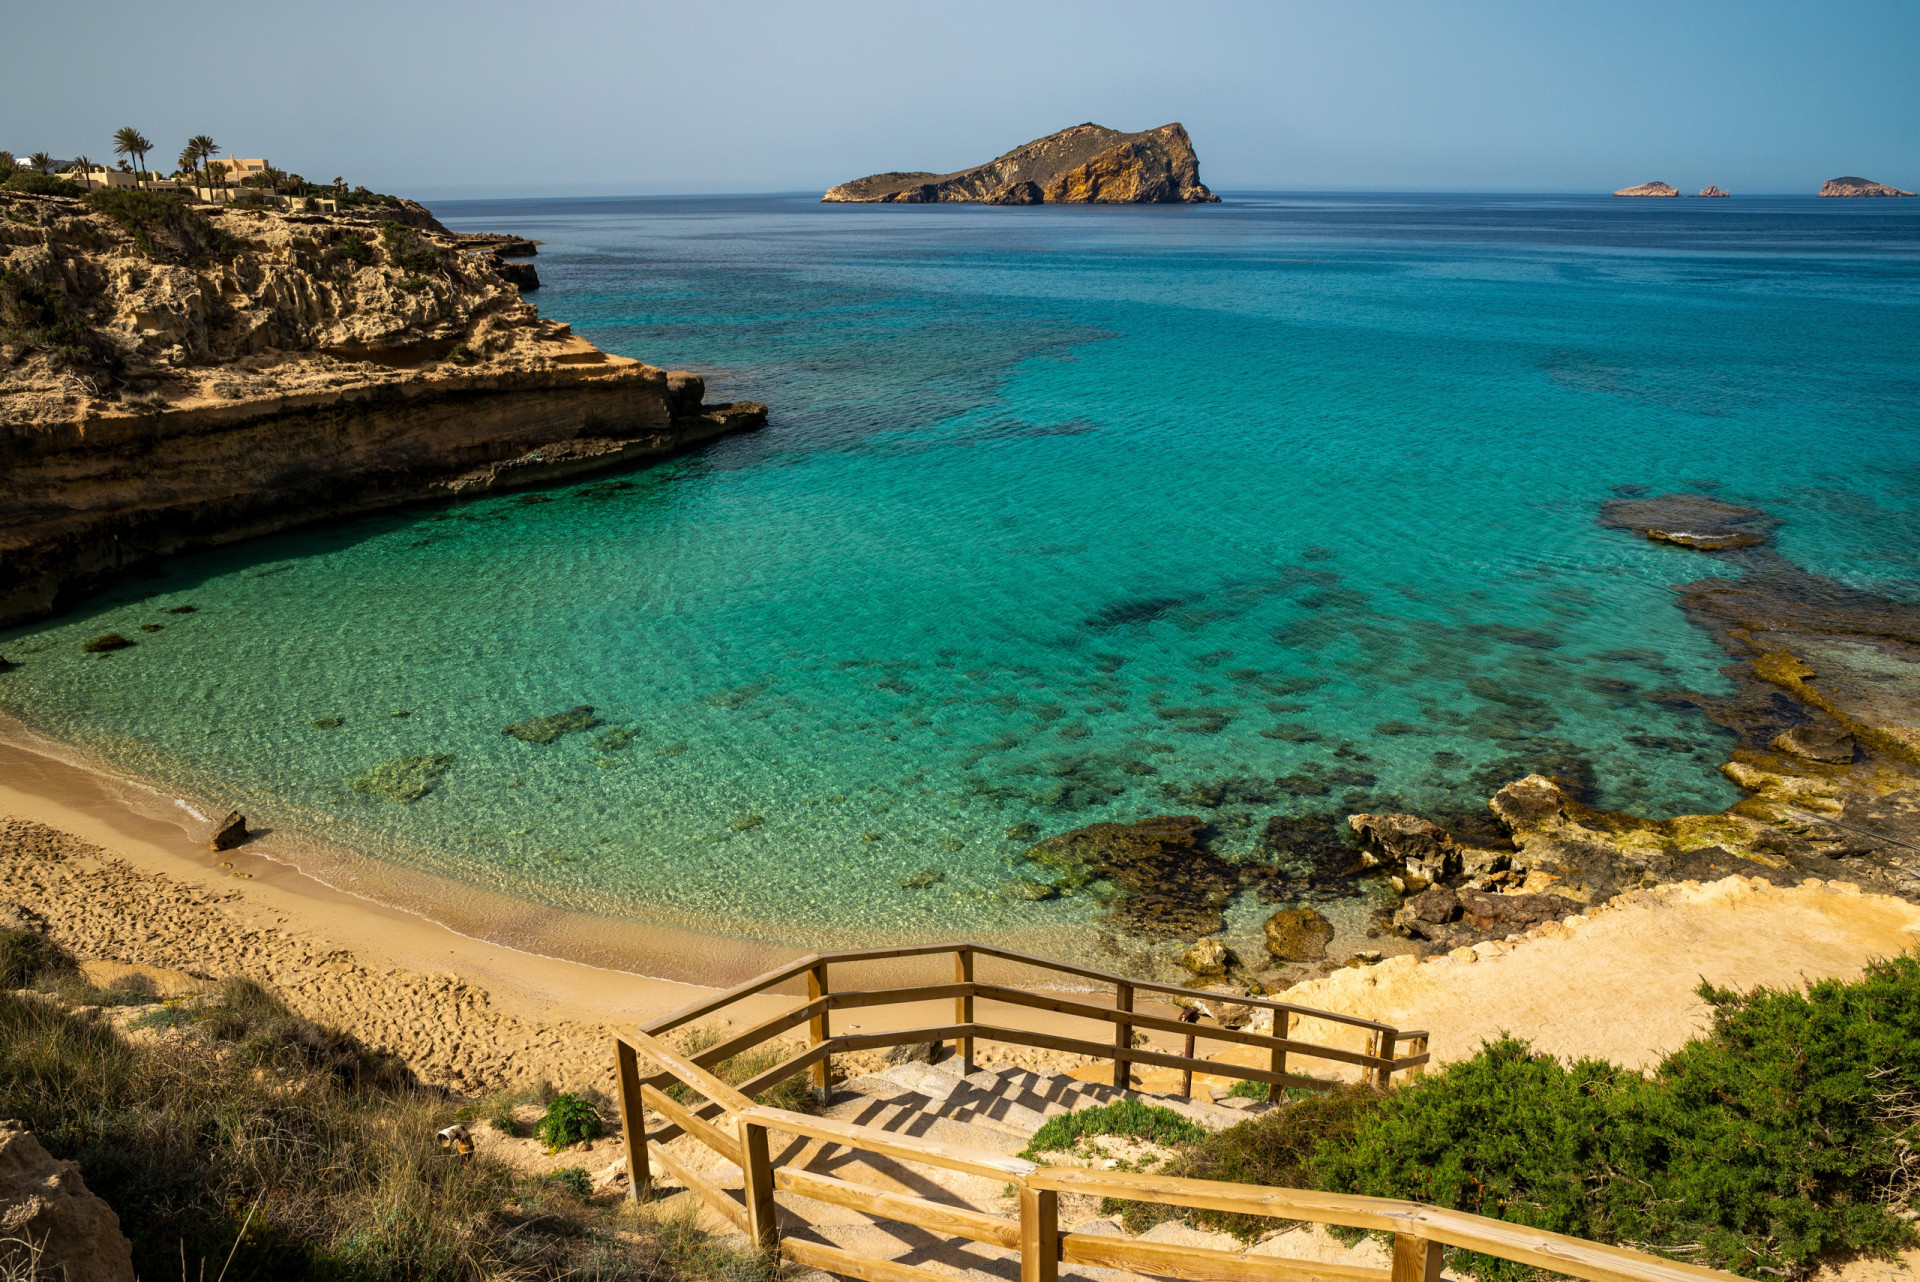 <p>Score: 4.142</p> <p>Located in southwestern Ibiza, Cala Comte is an enchanting beach with beautiful turquoise water.</p><p>You may also like:<a href="https://www.starsinsider.com/n/497776?utm_source=msn.com&utm_medium=display&utm_campaign=referral_description&utm_content=697708en-en_selected"> Aphasia: what is it and which celebs suffered from it?</a></p>